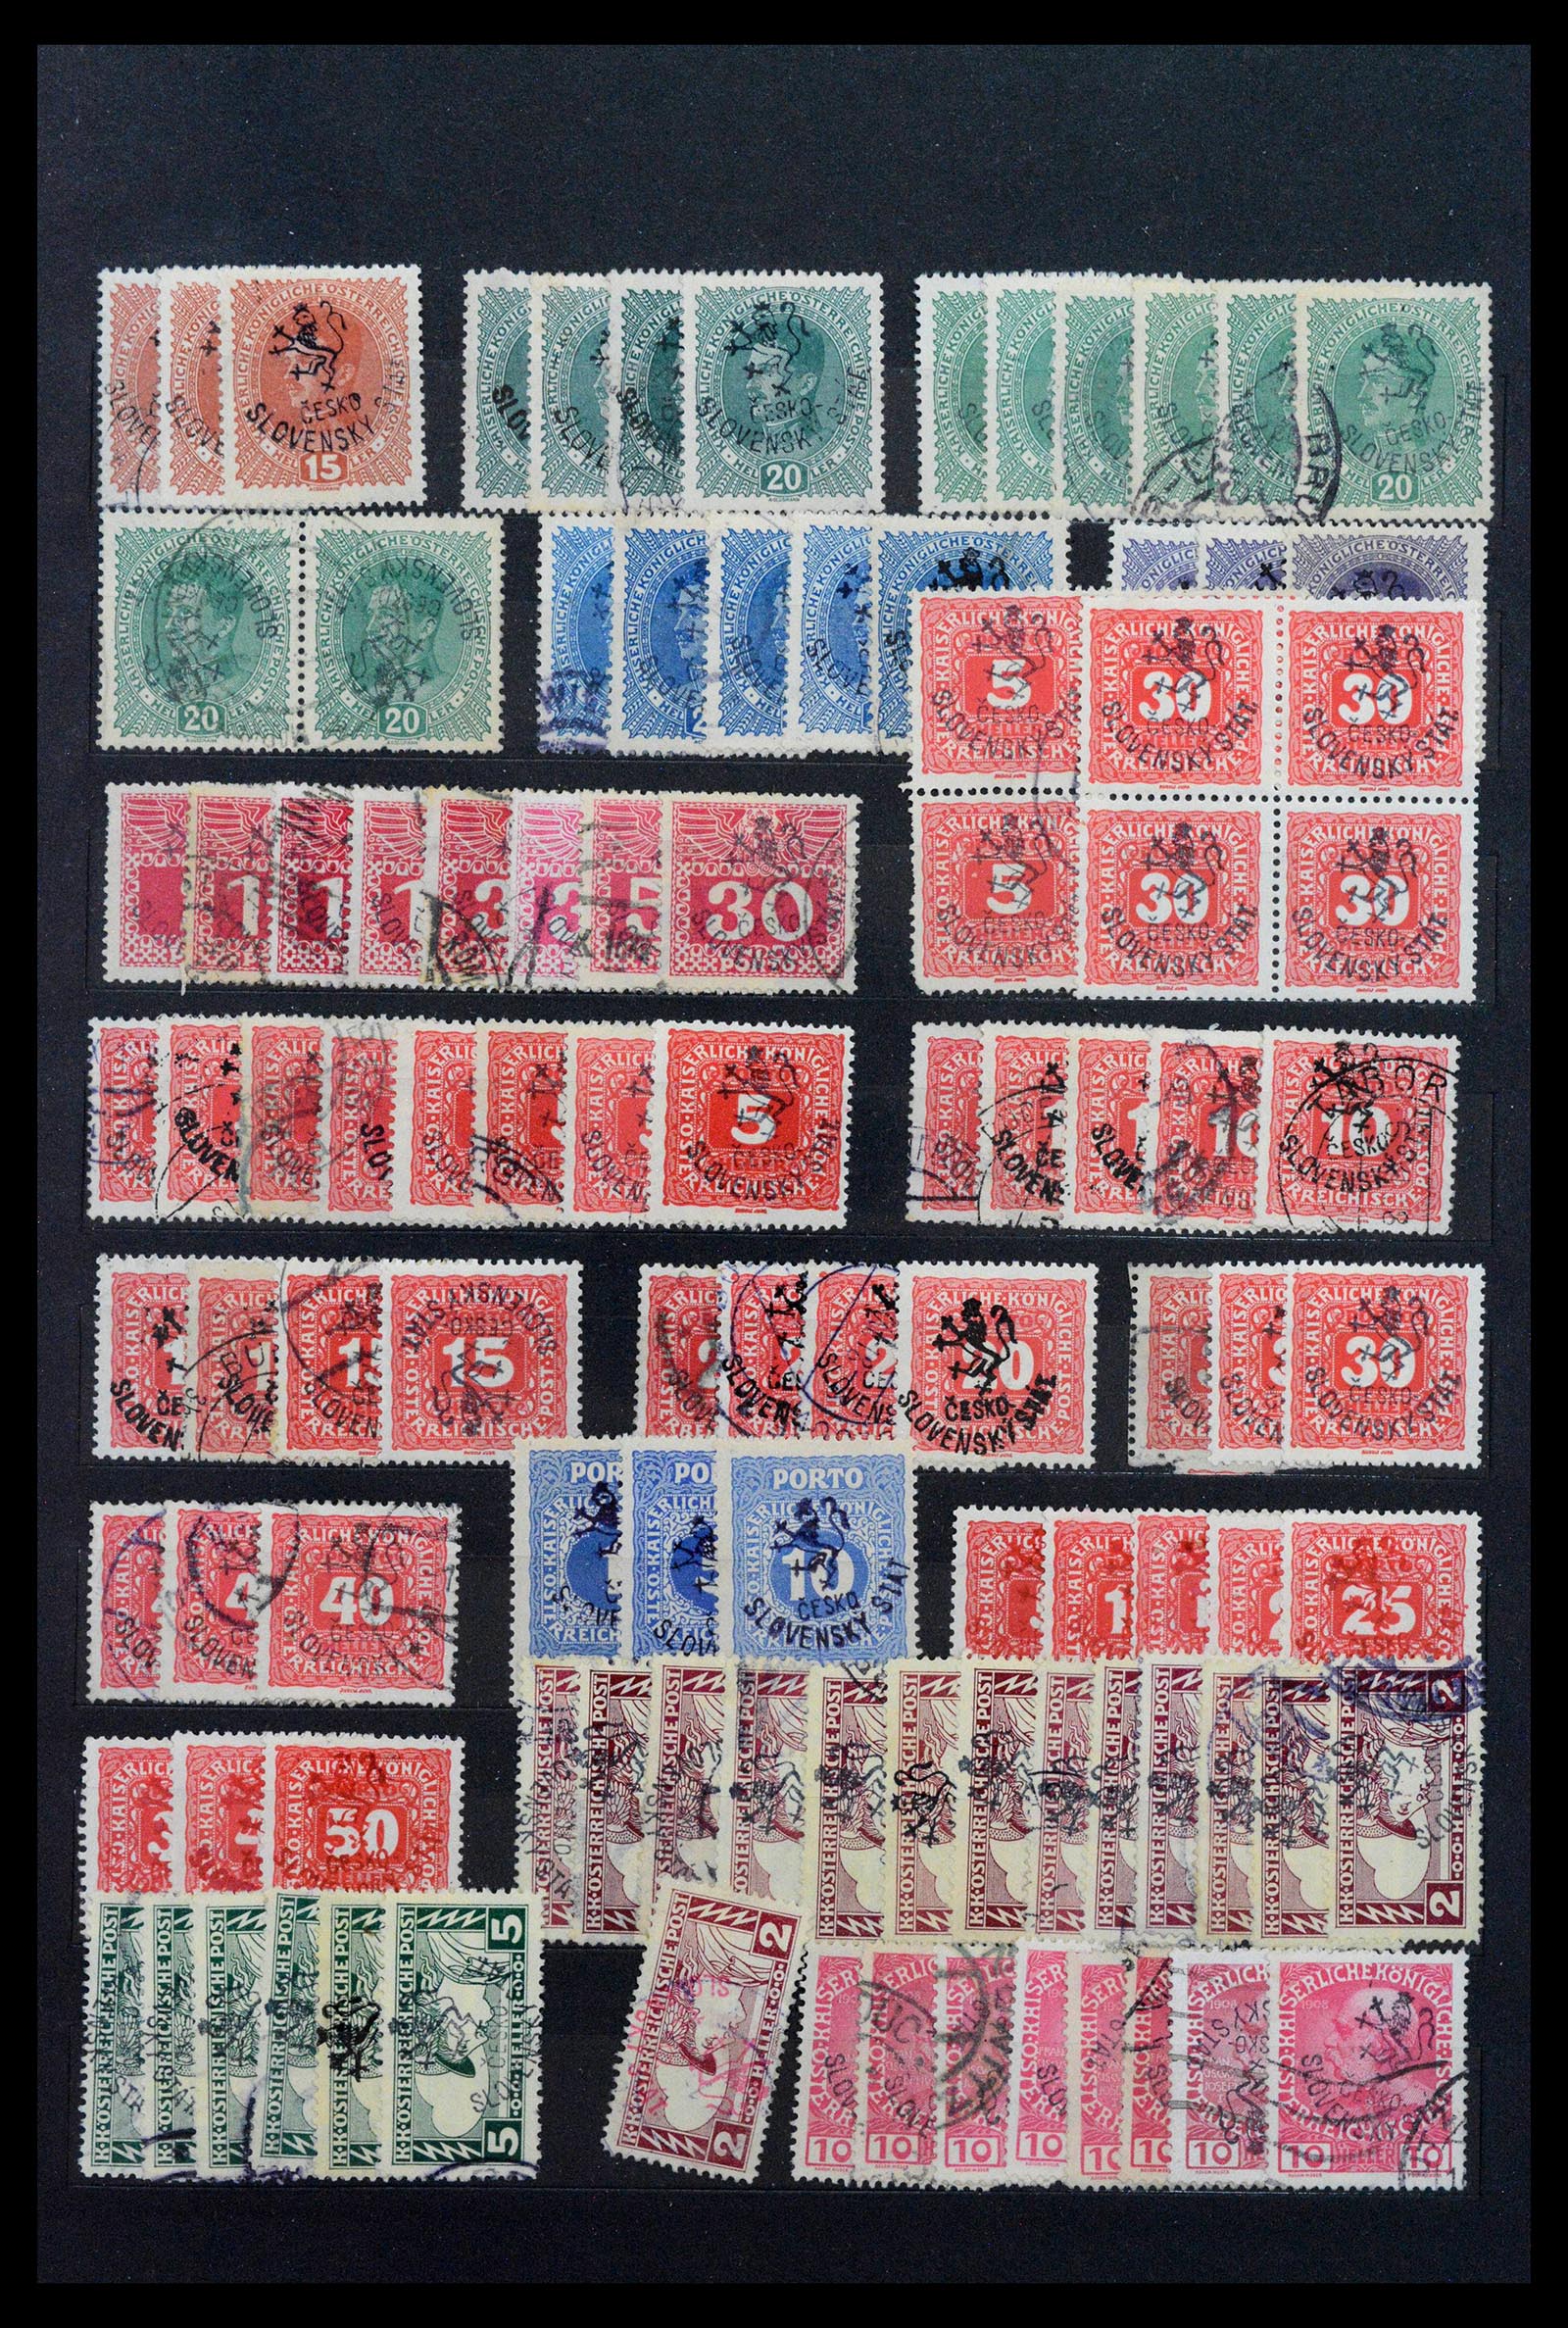 39165 0002 - Stamp collection 39165 Czechoslovakia specialised 1919-1970.